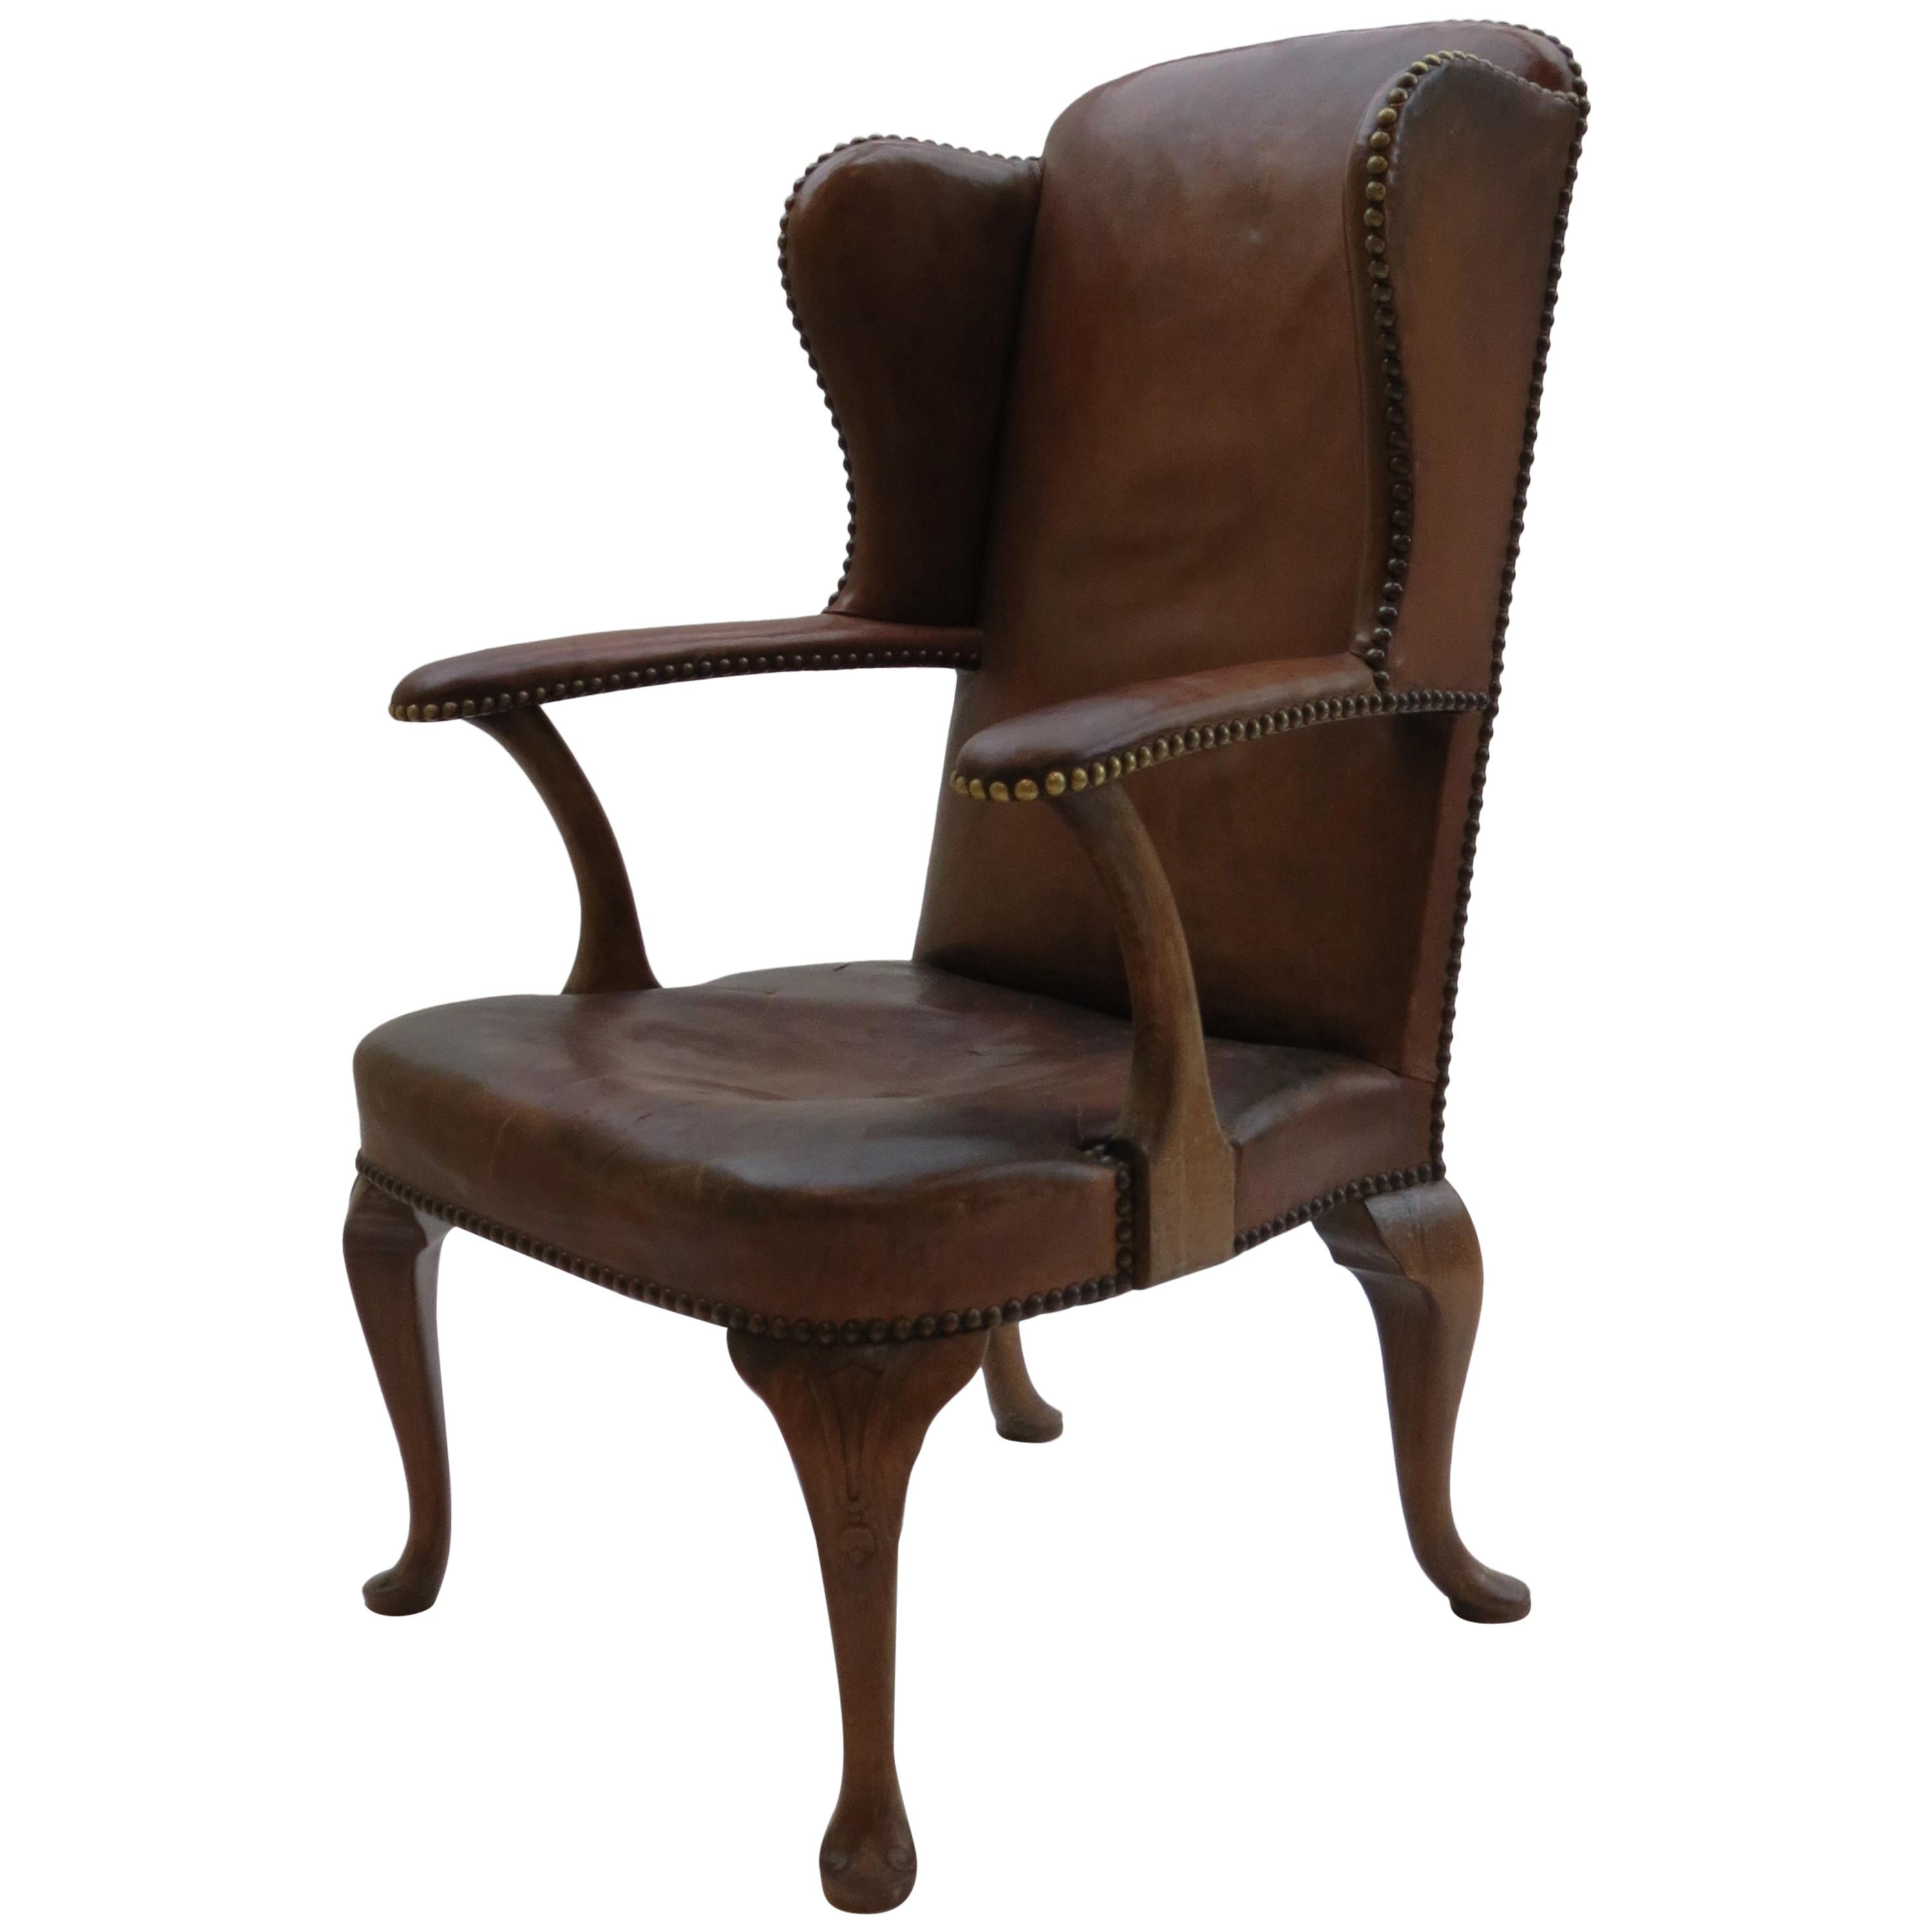 1940s Danish Leather and Oak Armchair by Handsen Lysberg and Therp